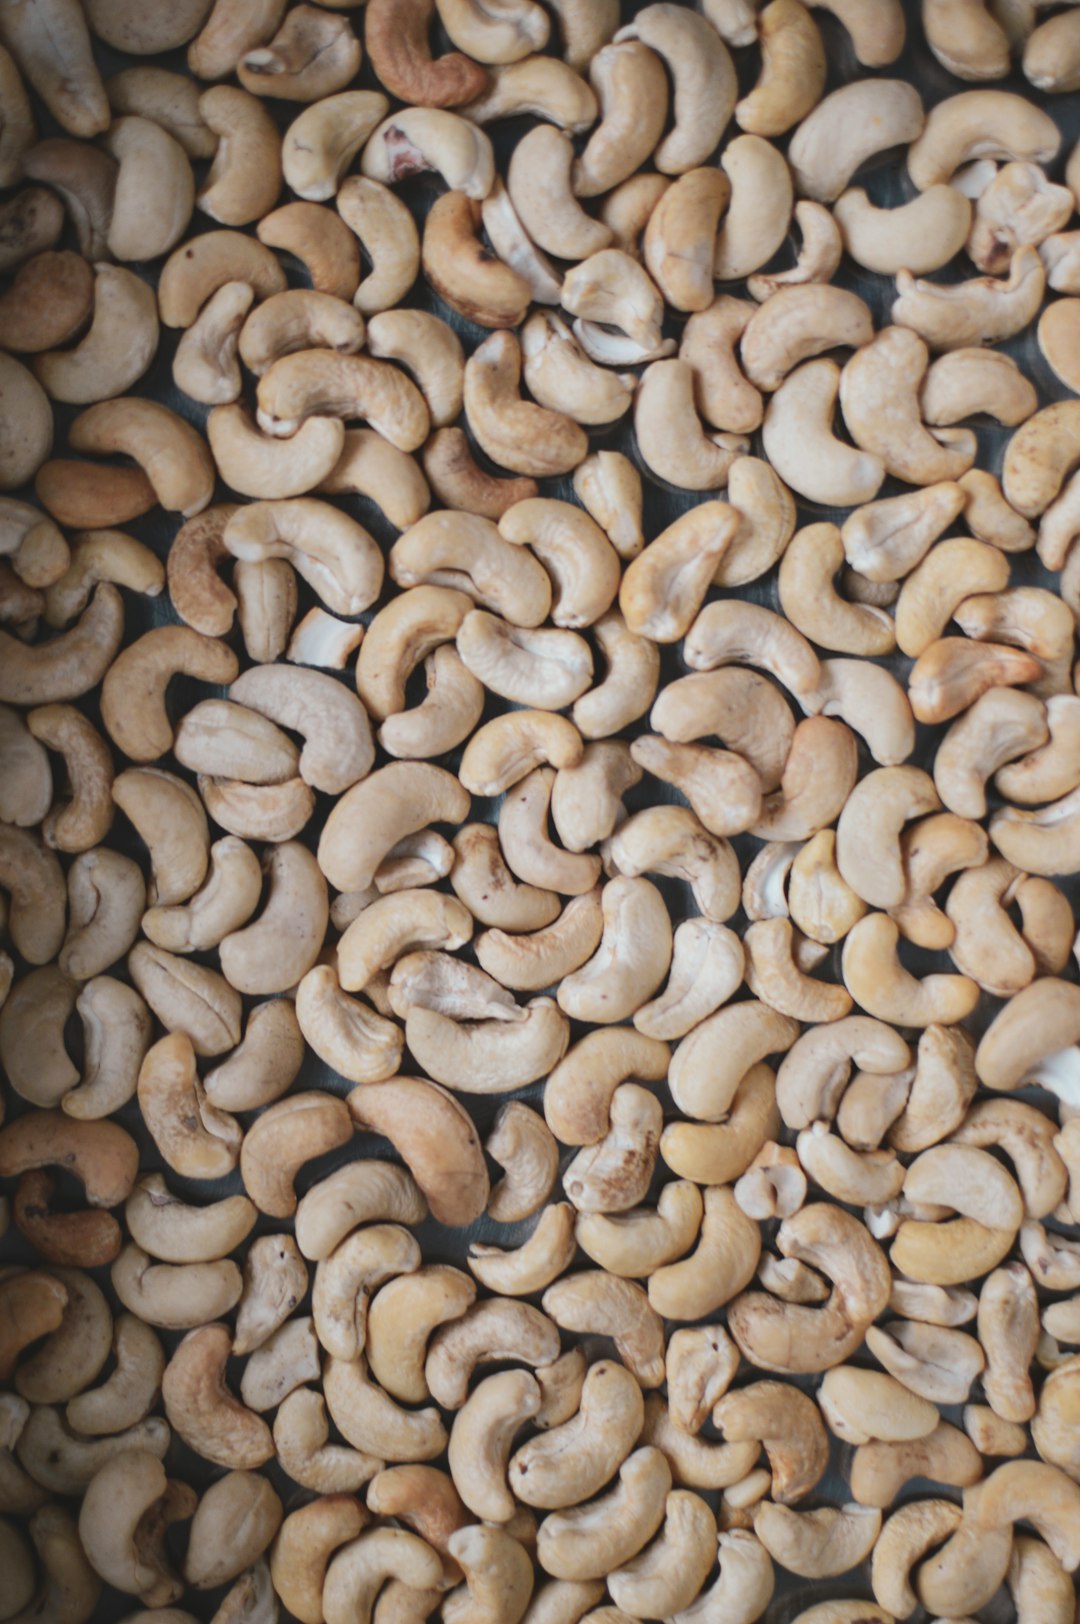 Looking for high-quality cashew nuts in India? Contact